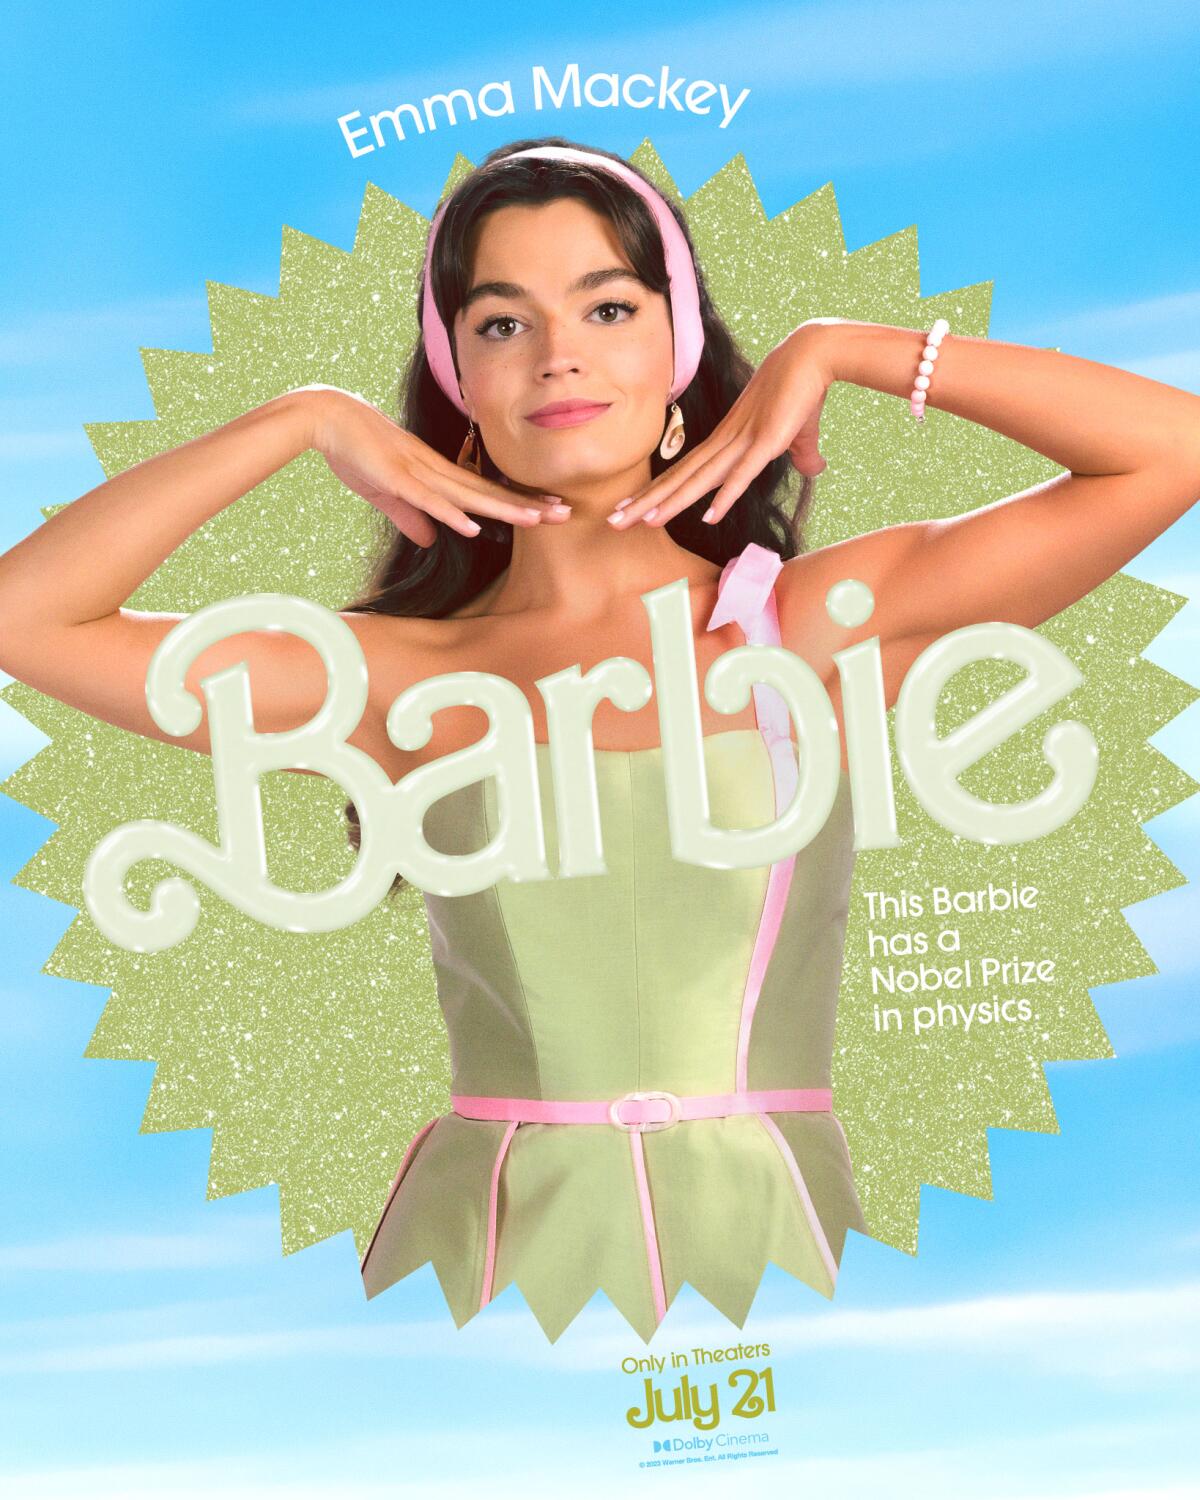 Emma Mackey poses with her hands under her chin in a "Barbie" movie poster. She wears a green dress and a pink headband.